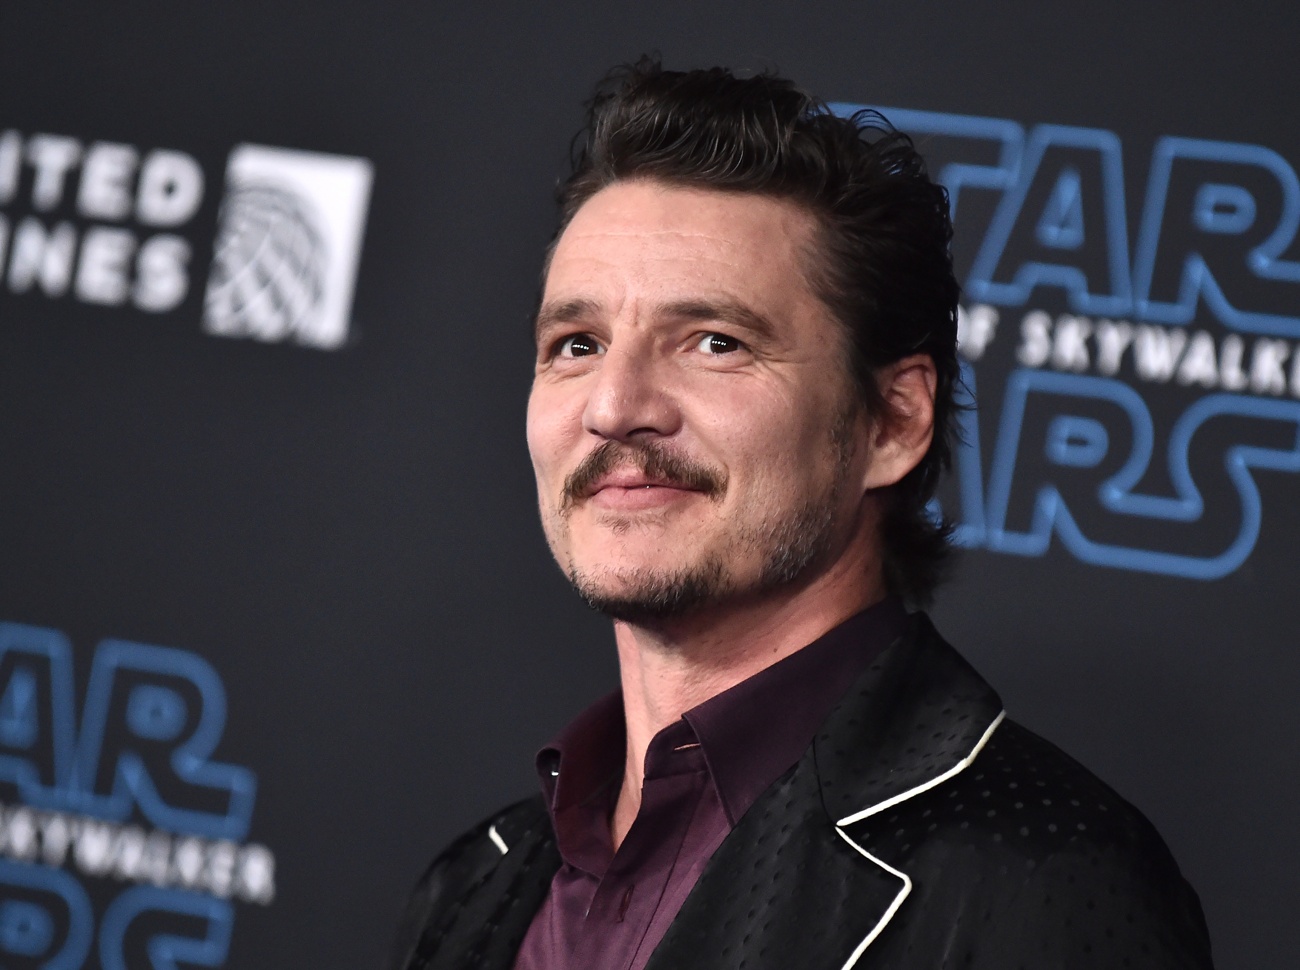 Pedro Pascal tells a surprising anecdote: a fan gave him an eye infection after recreating THAT scene from »Game of Thrones»